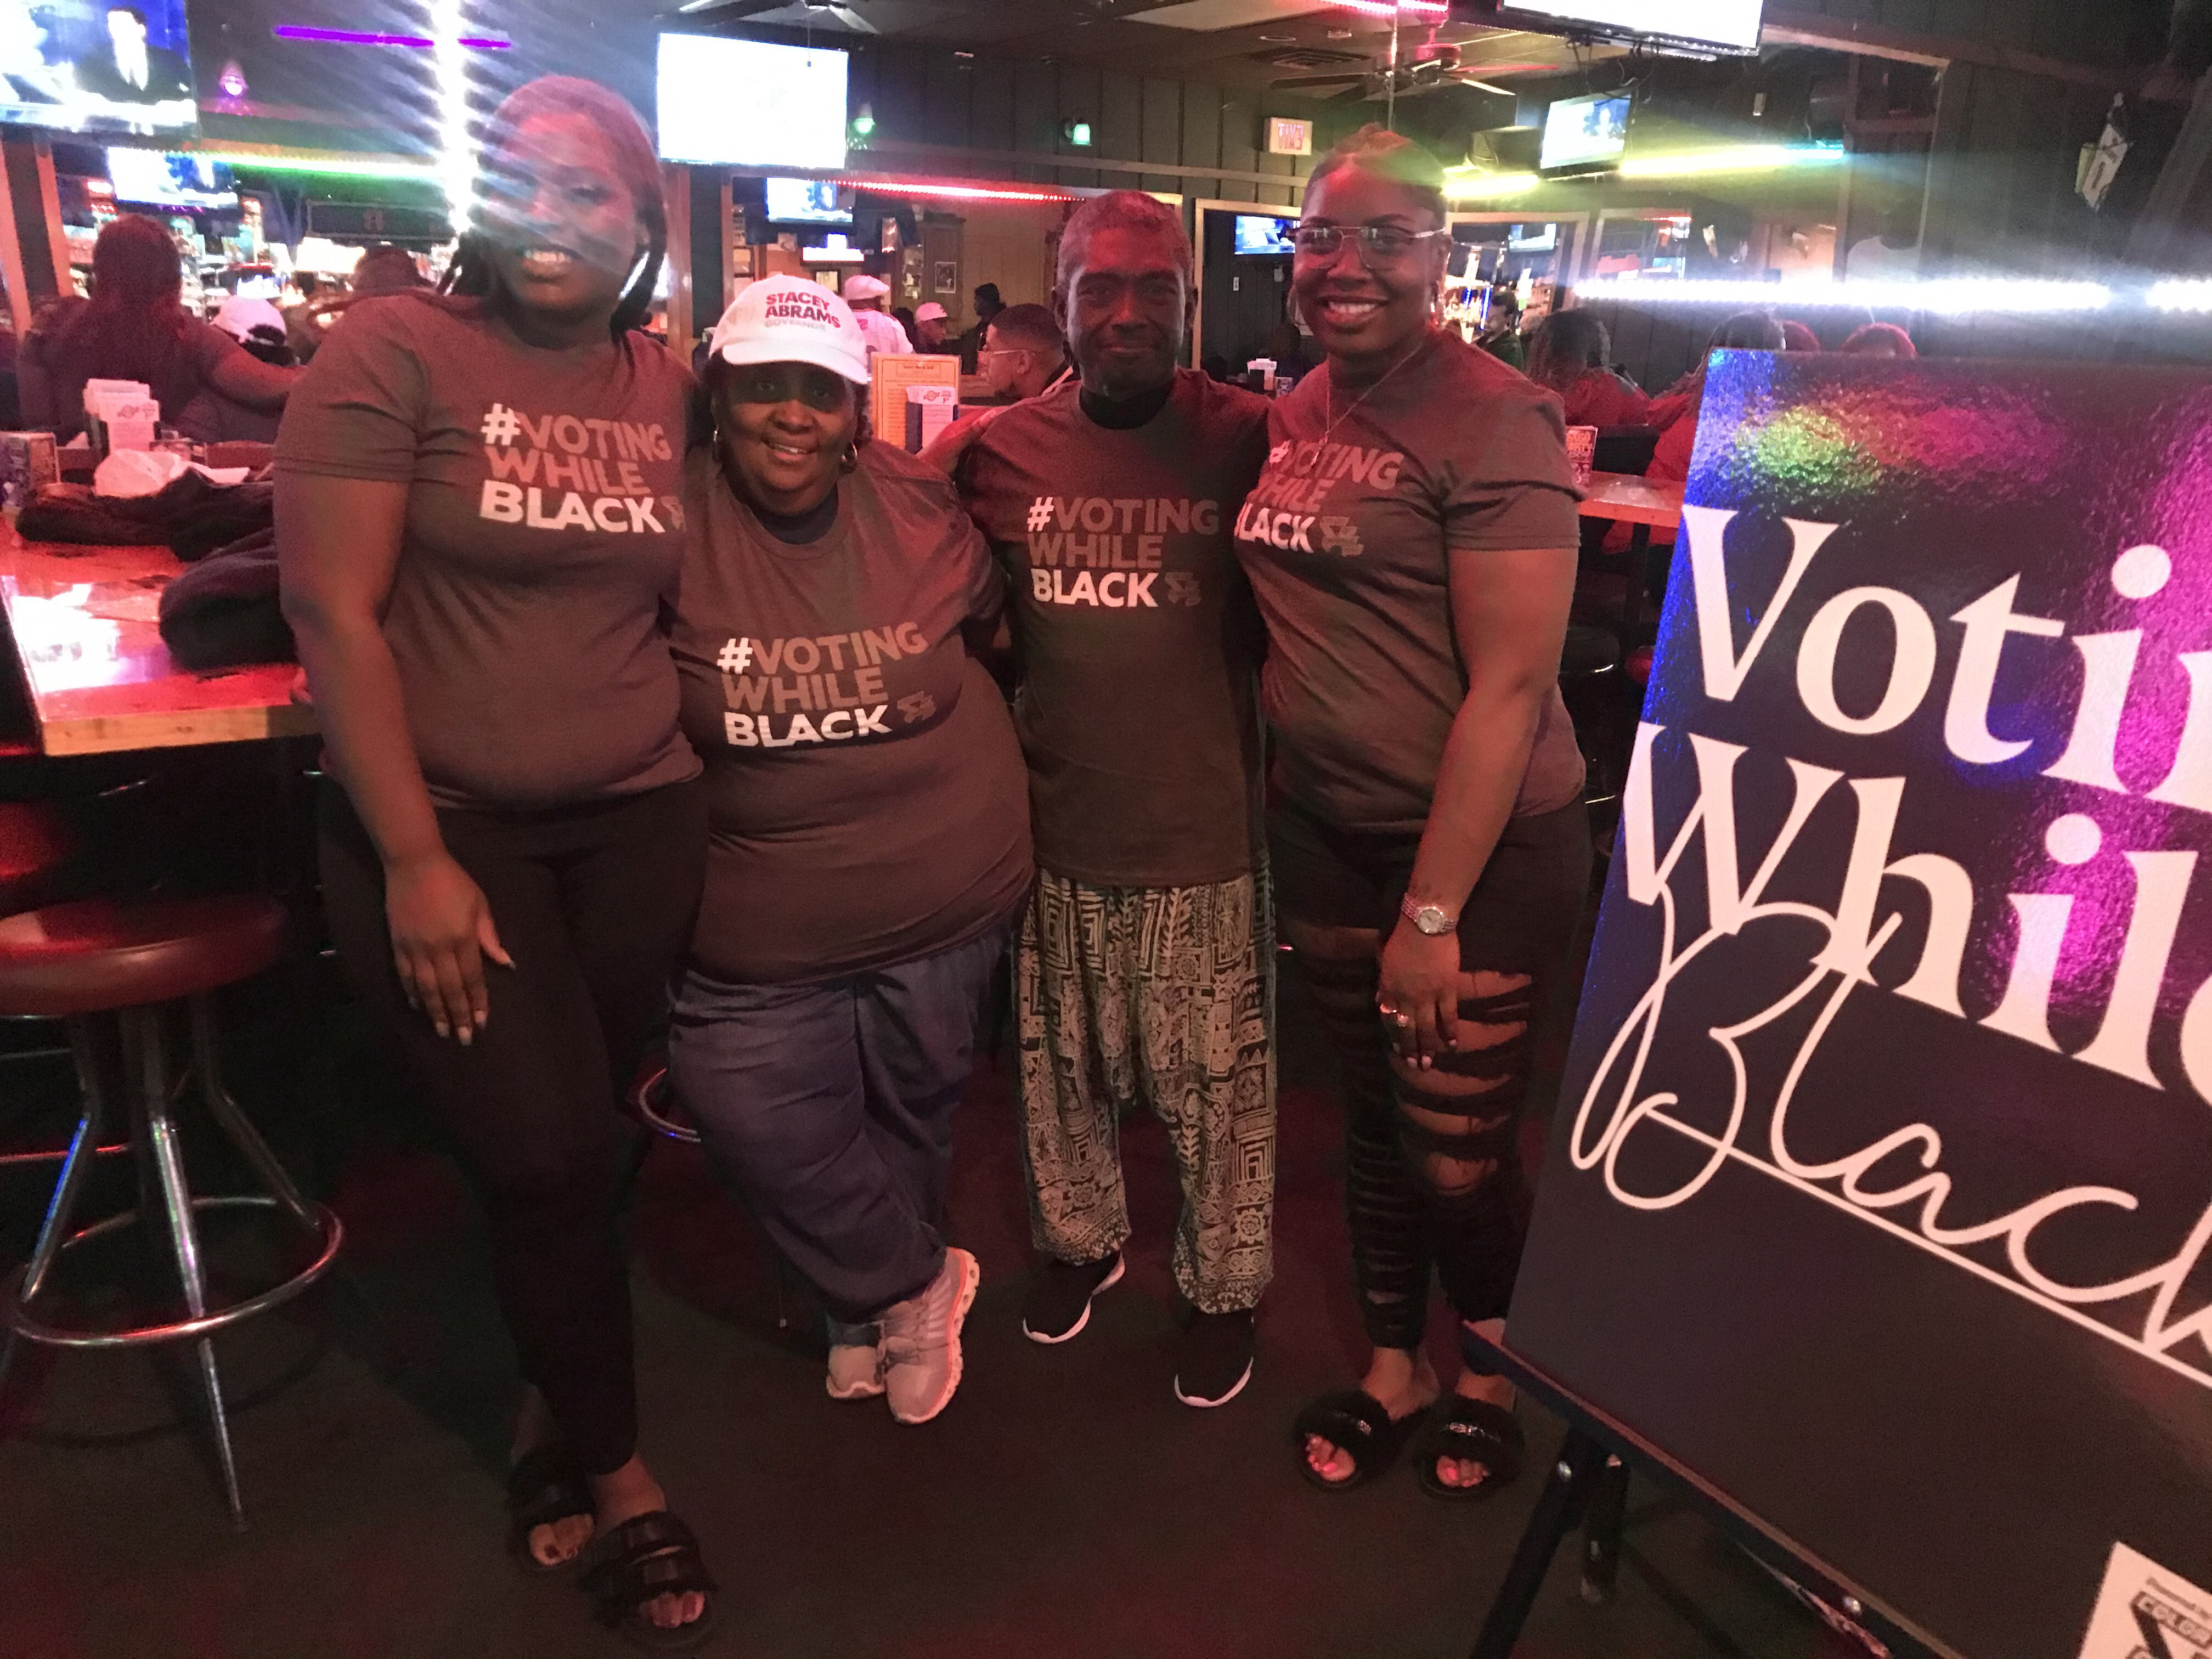 Me and some of my Squad members at the Debate Watch Party last night at Rube's